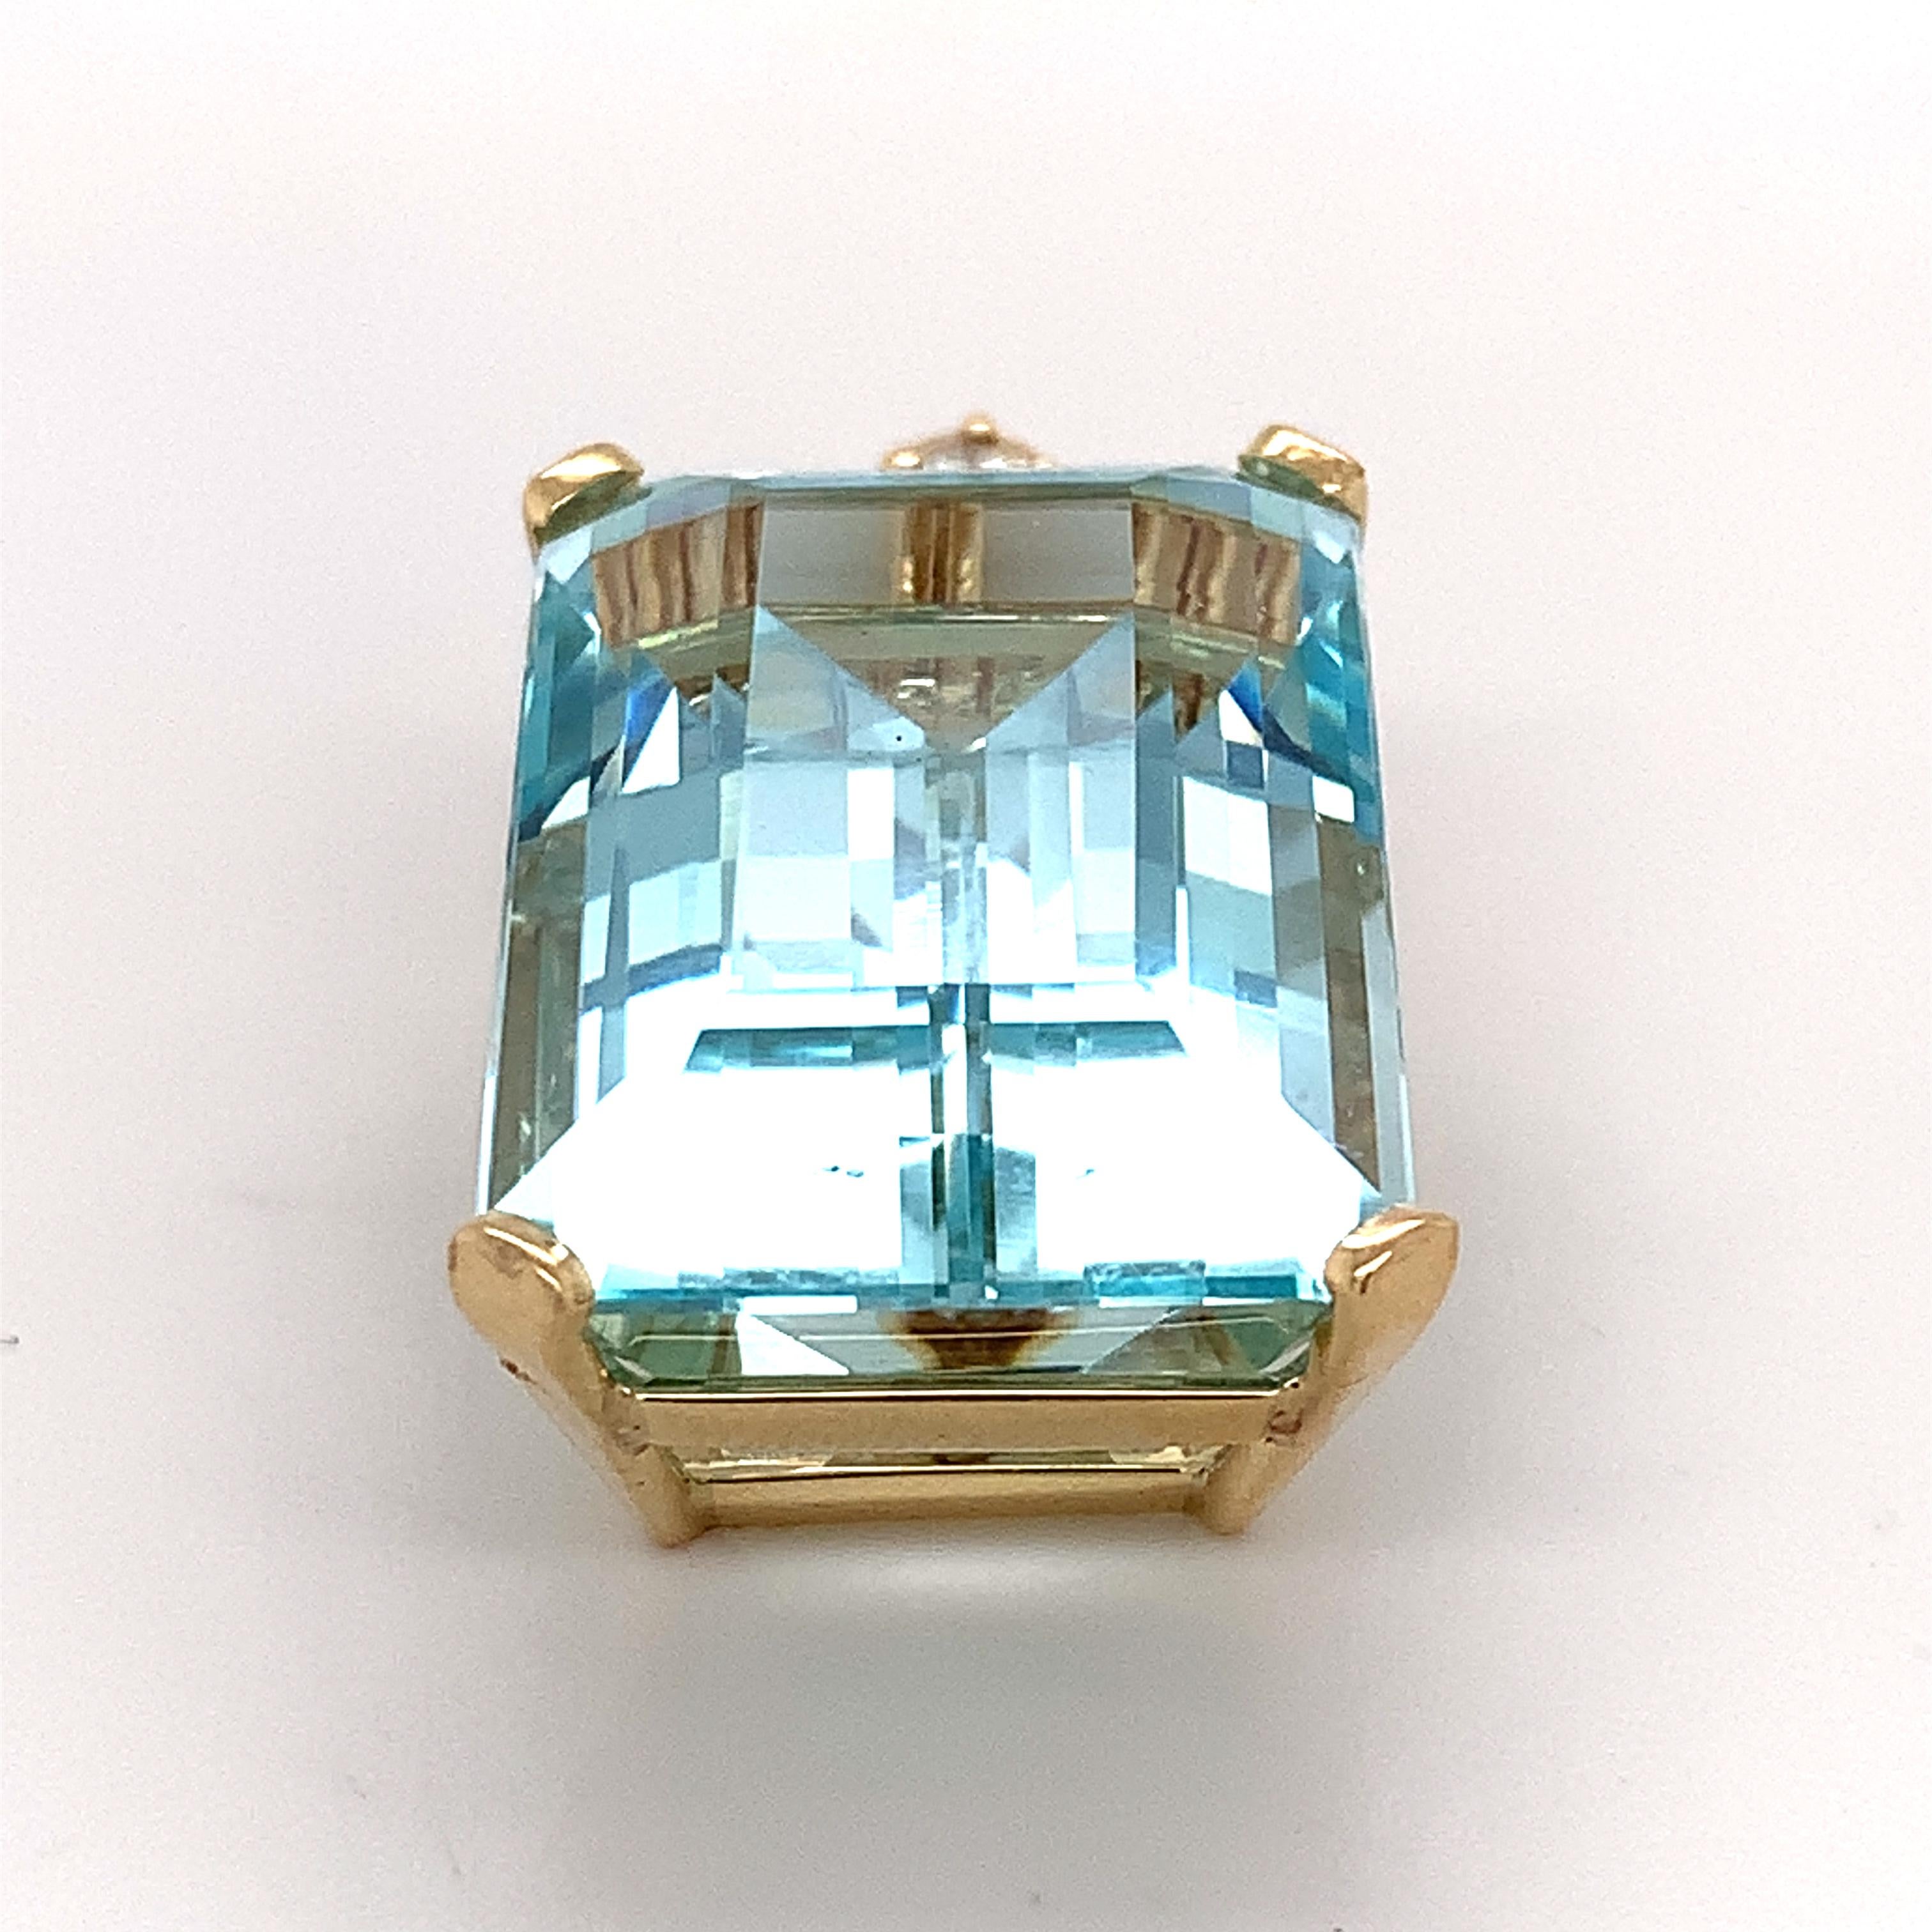 14k Yellow Gold Blue Aquamarine And Diamond Pendant

13.8 Grams

1 1/4 Inches Tall 

6 Round White Diamonds 0.25 Carats Total Weight

Approximately 40 Carat Aquamarine 

This is a beautiful aquamarine and diamond pendant. If you have any questions